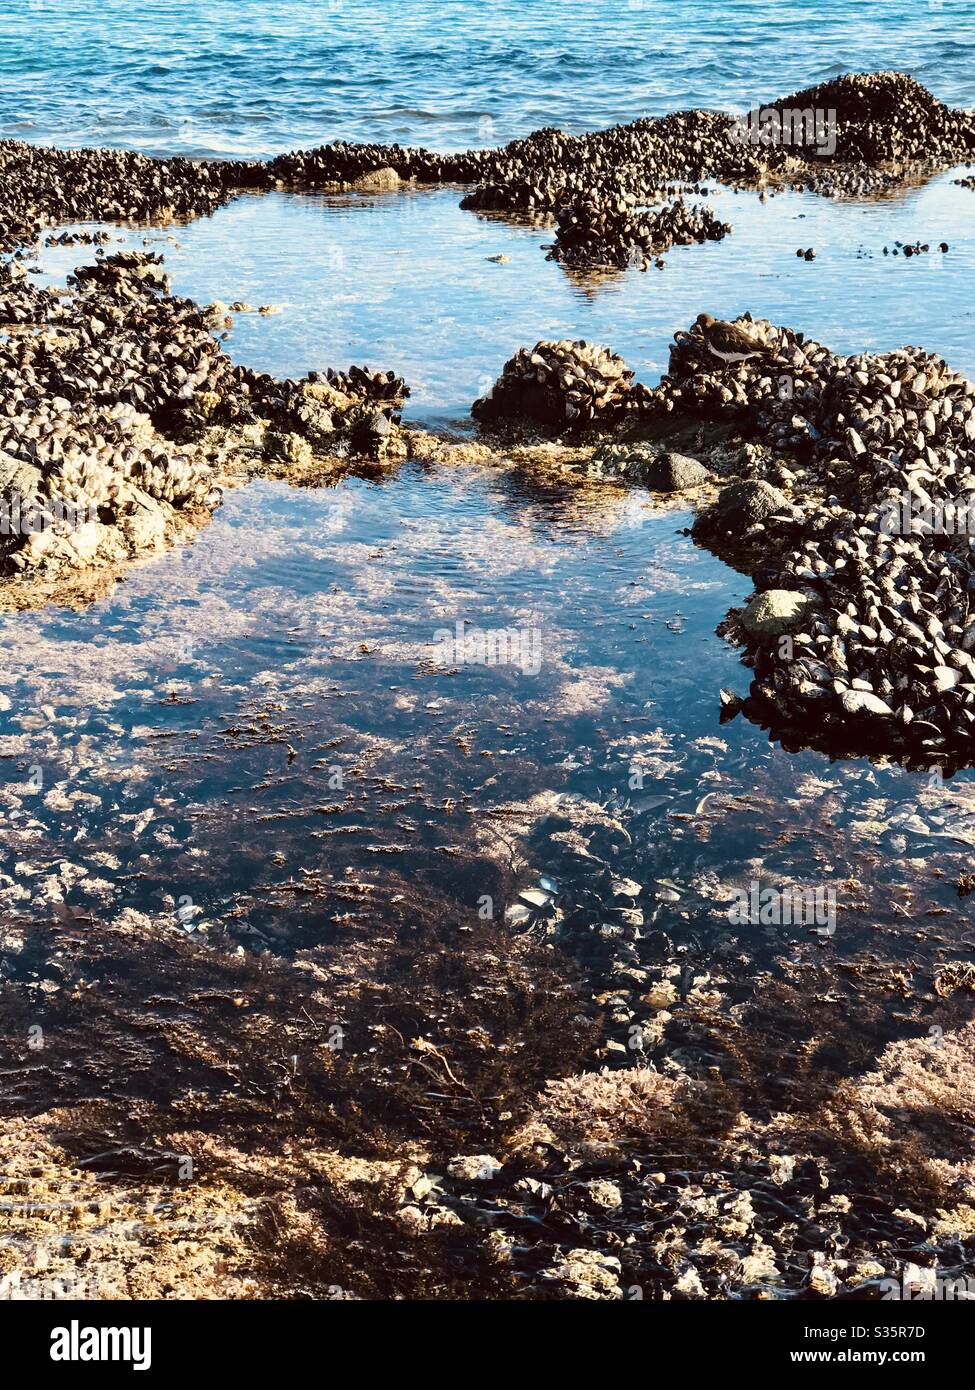 Low tide in a Southern California ocean cove. Stock Photo